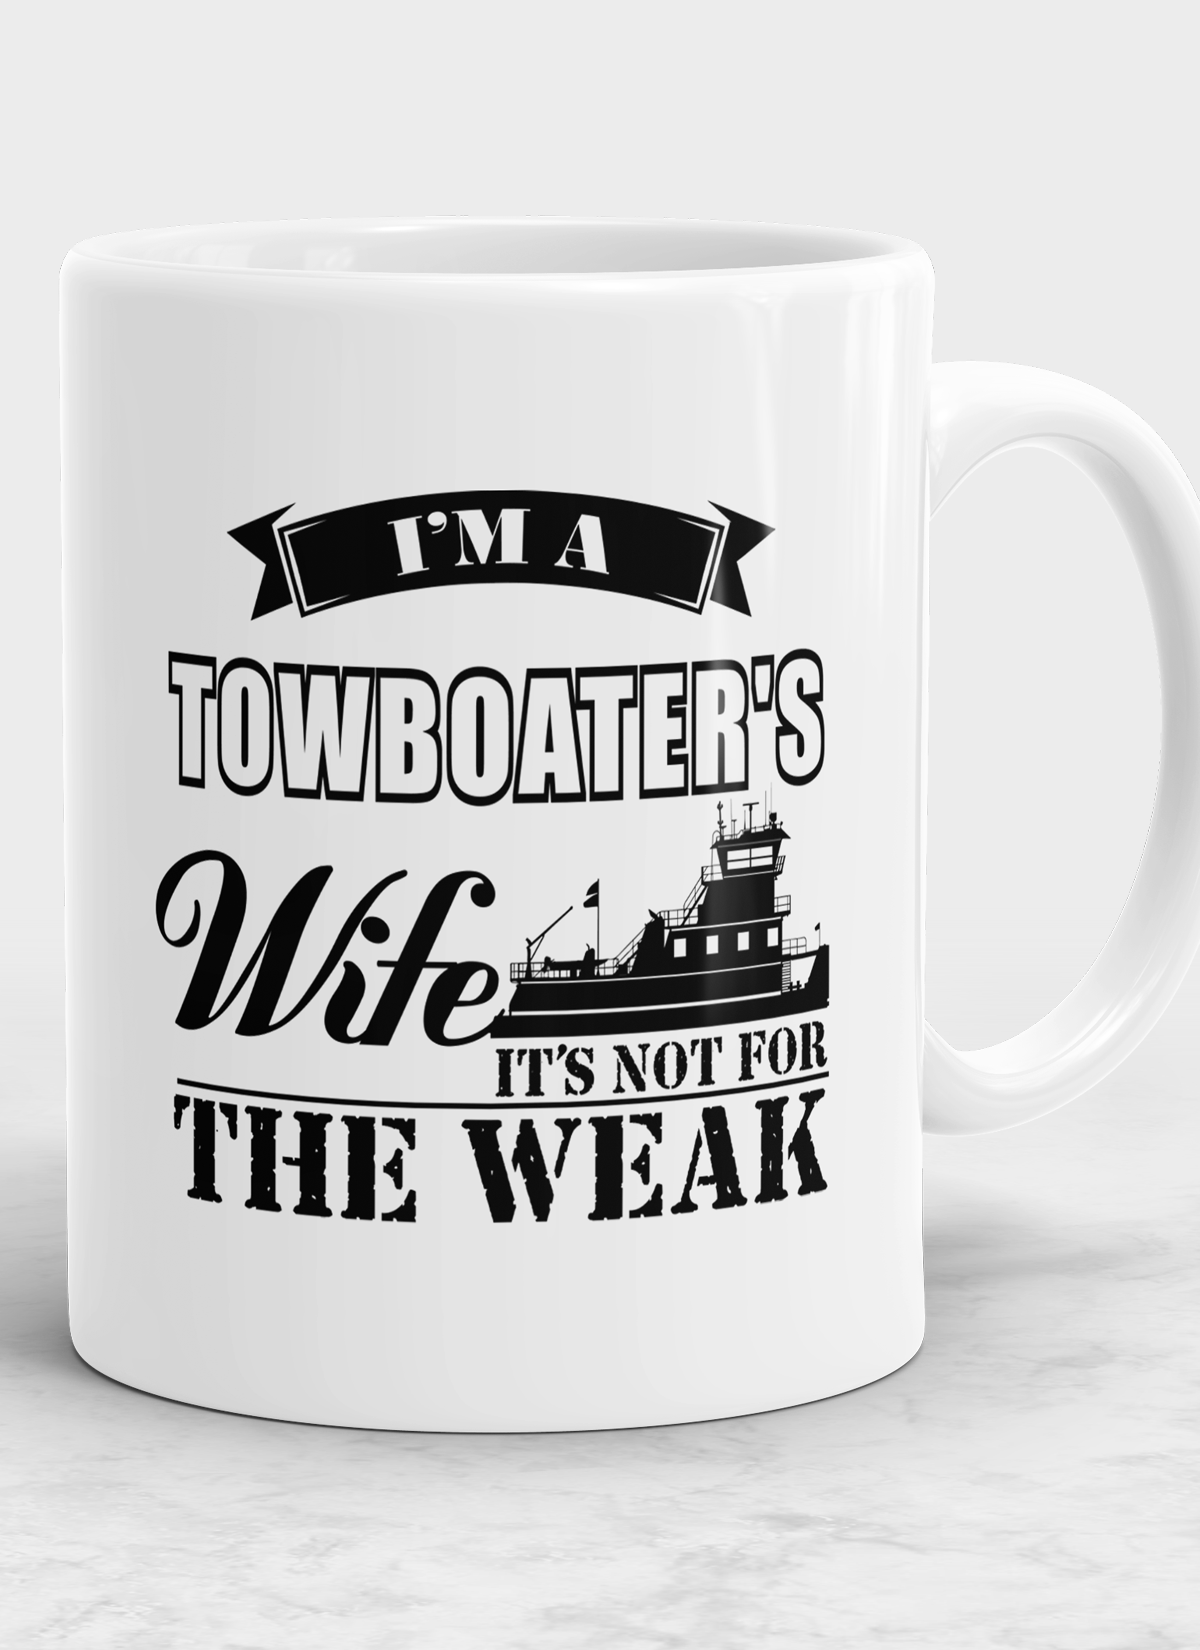 Not For The Weak Towboater's Wife Mug